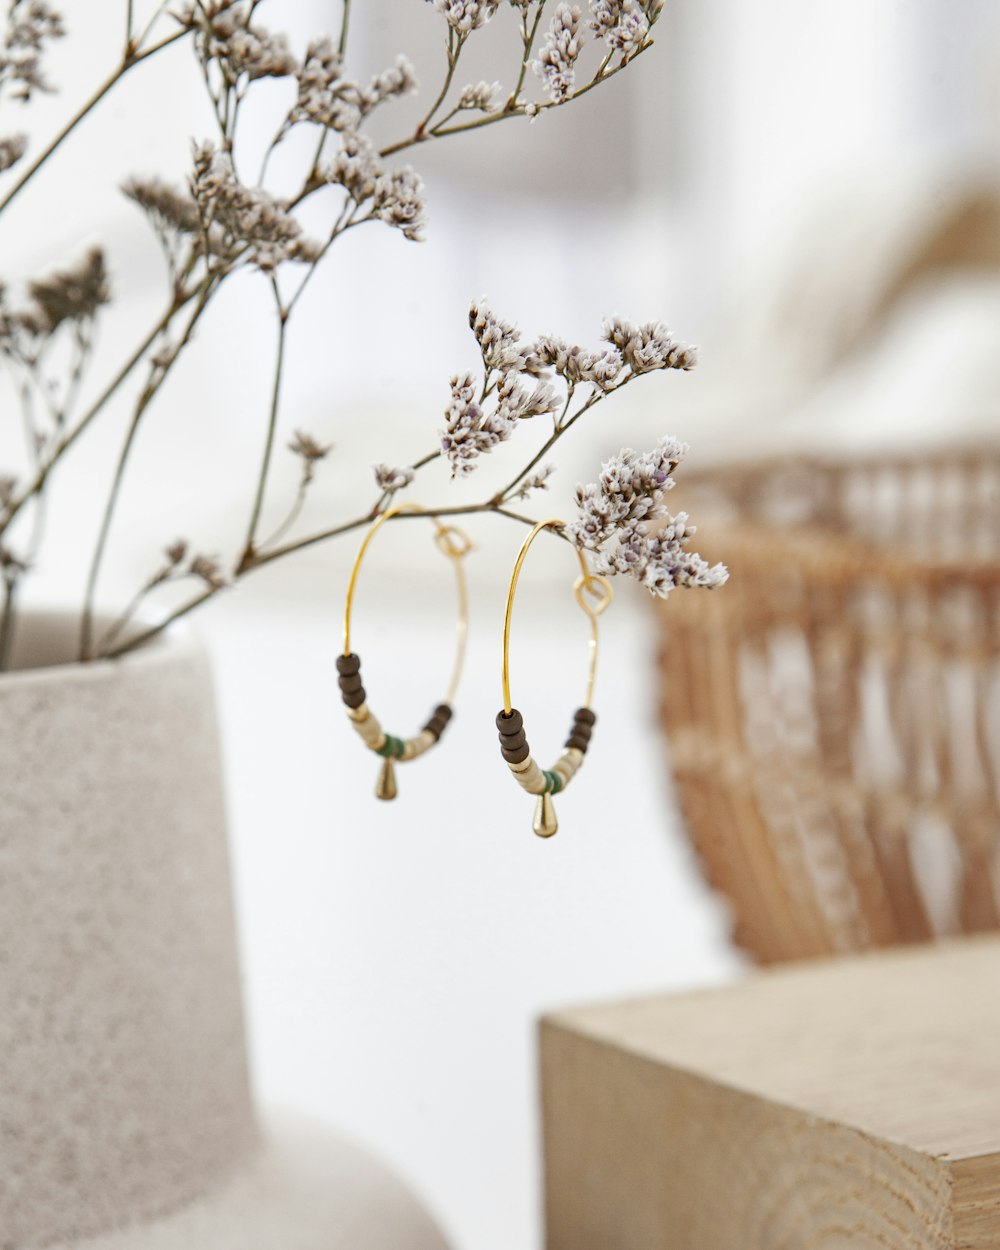 a pair of earrings hanging from a branch of a plant